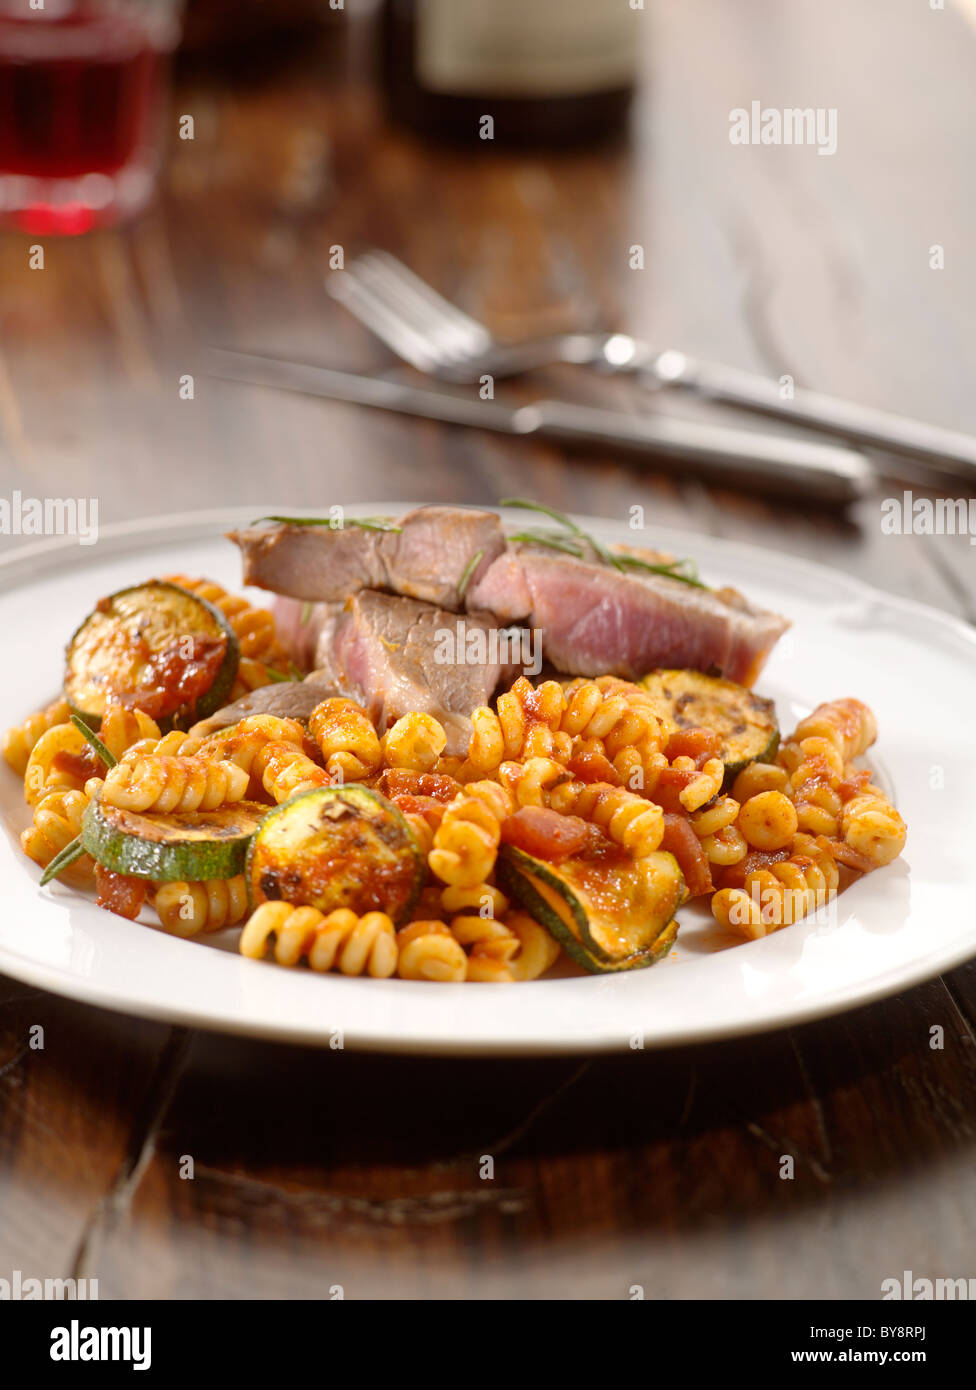 Barbeque steak with pasta Stock Photo